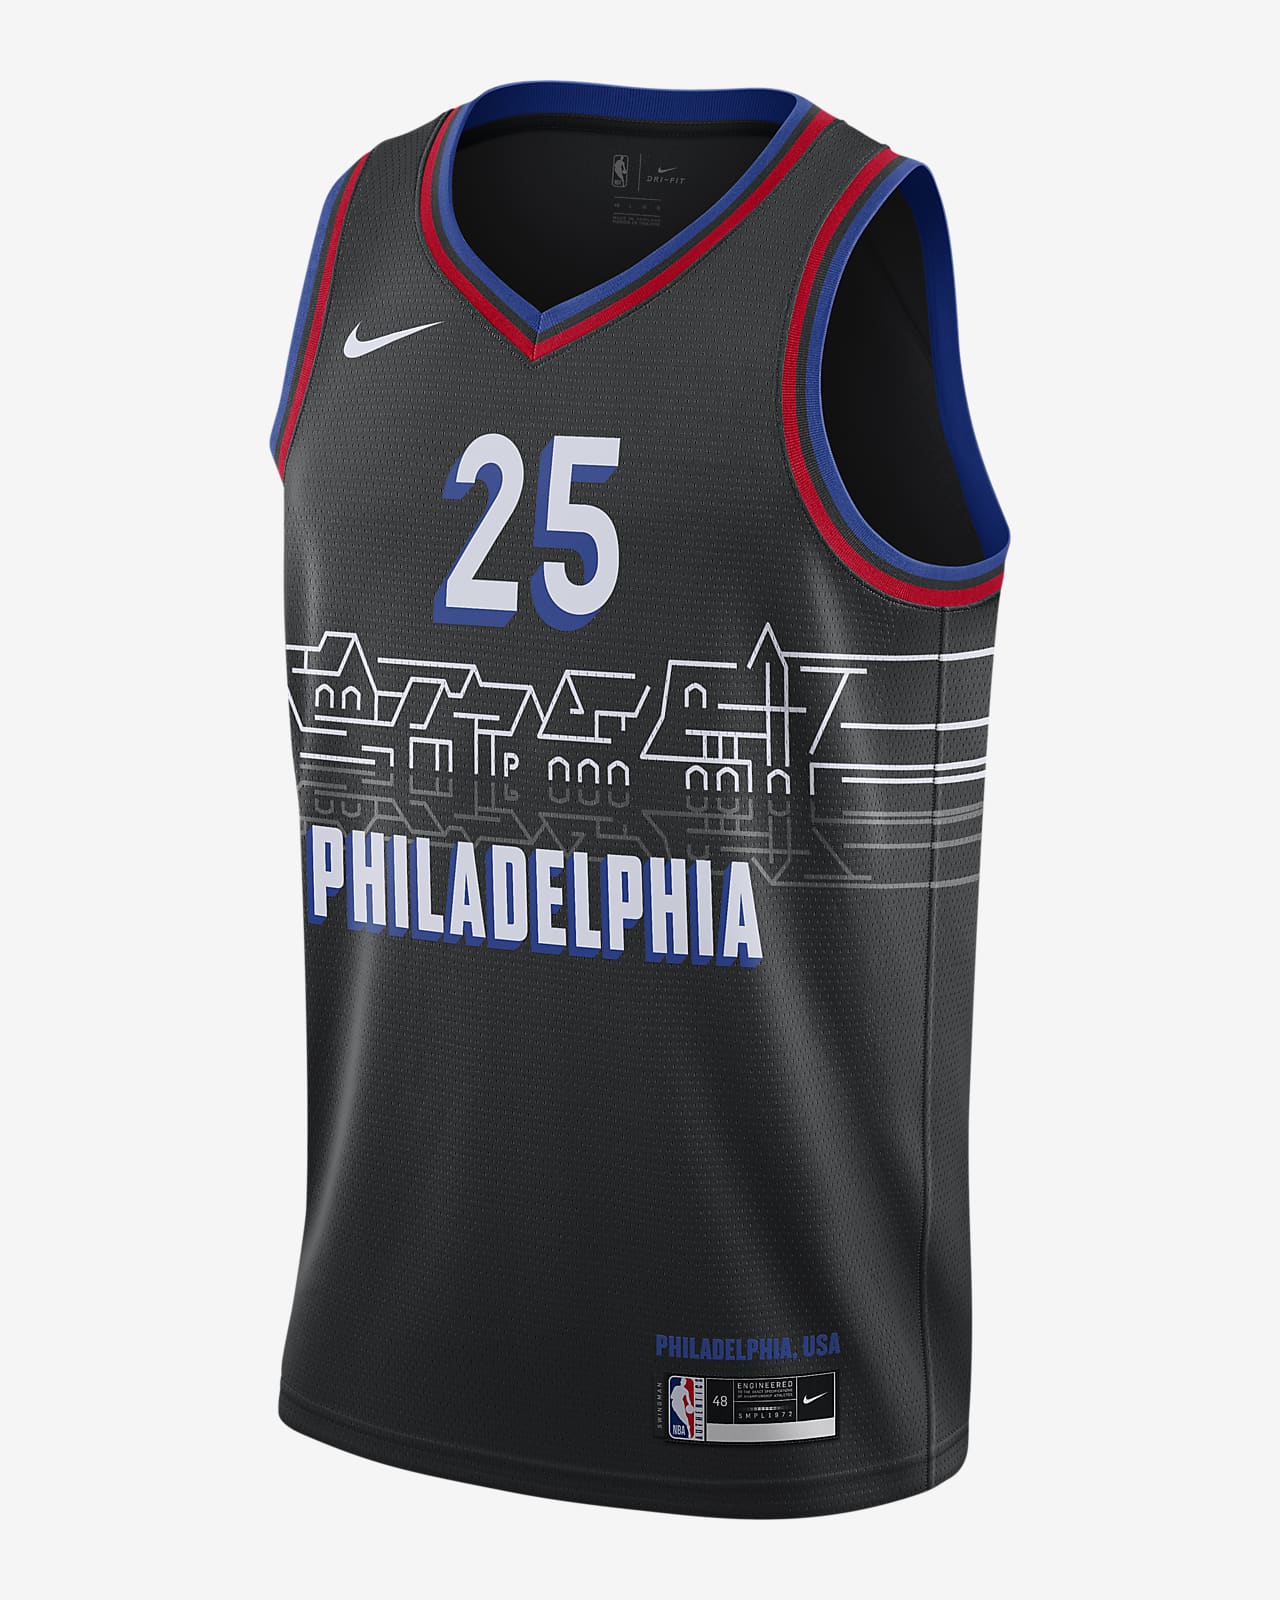 the city edition jersey